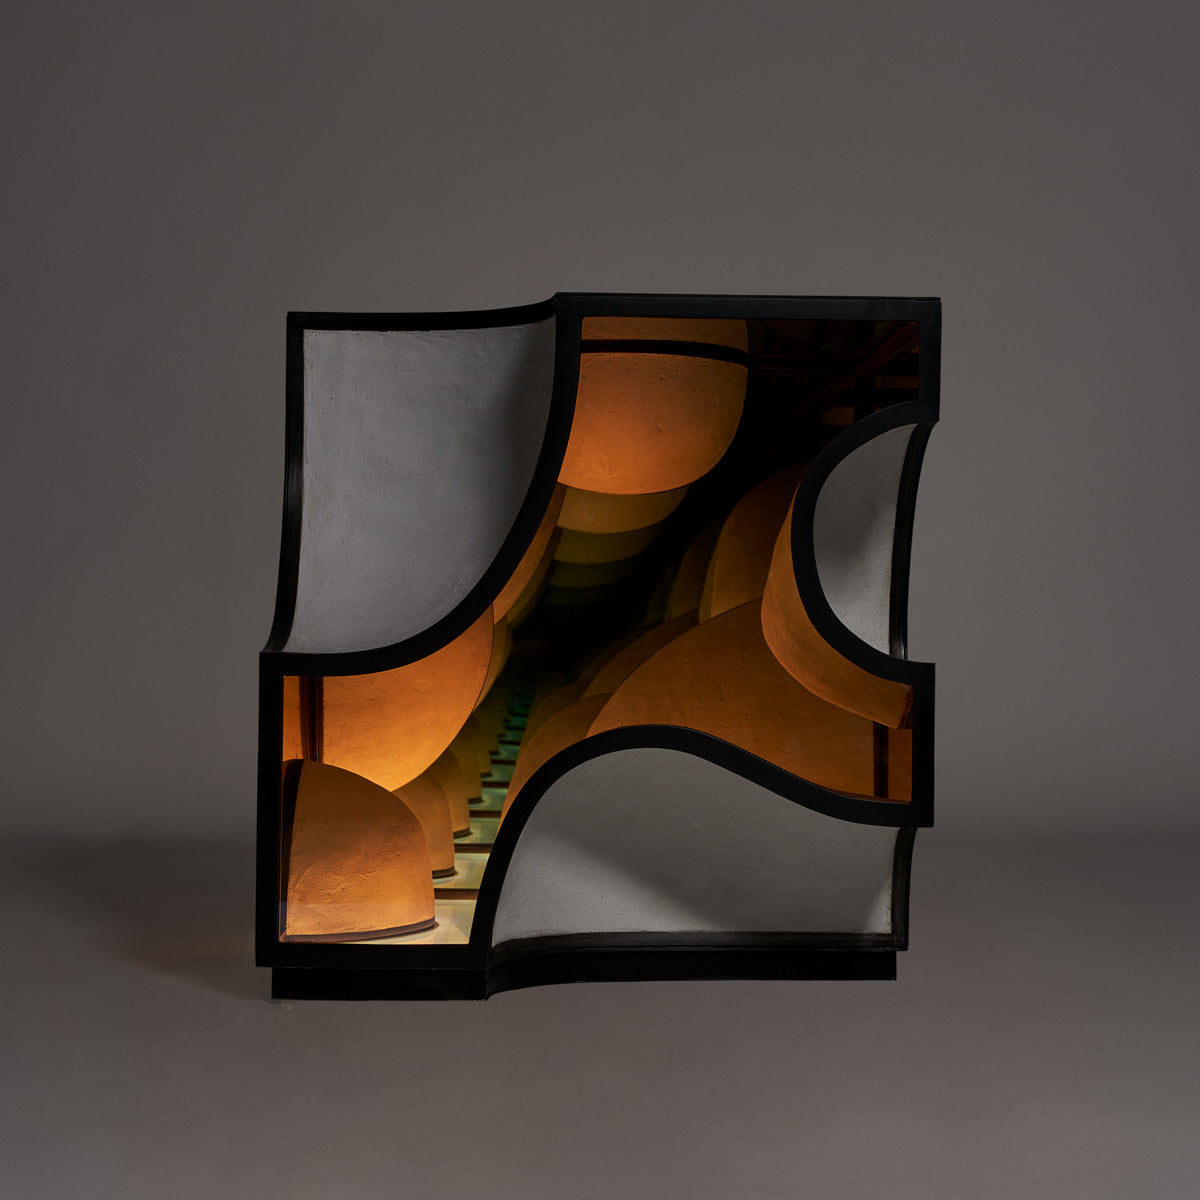 Cube Variations 1 (Reflection)